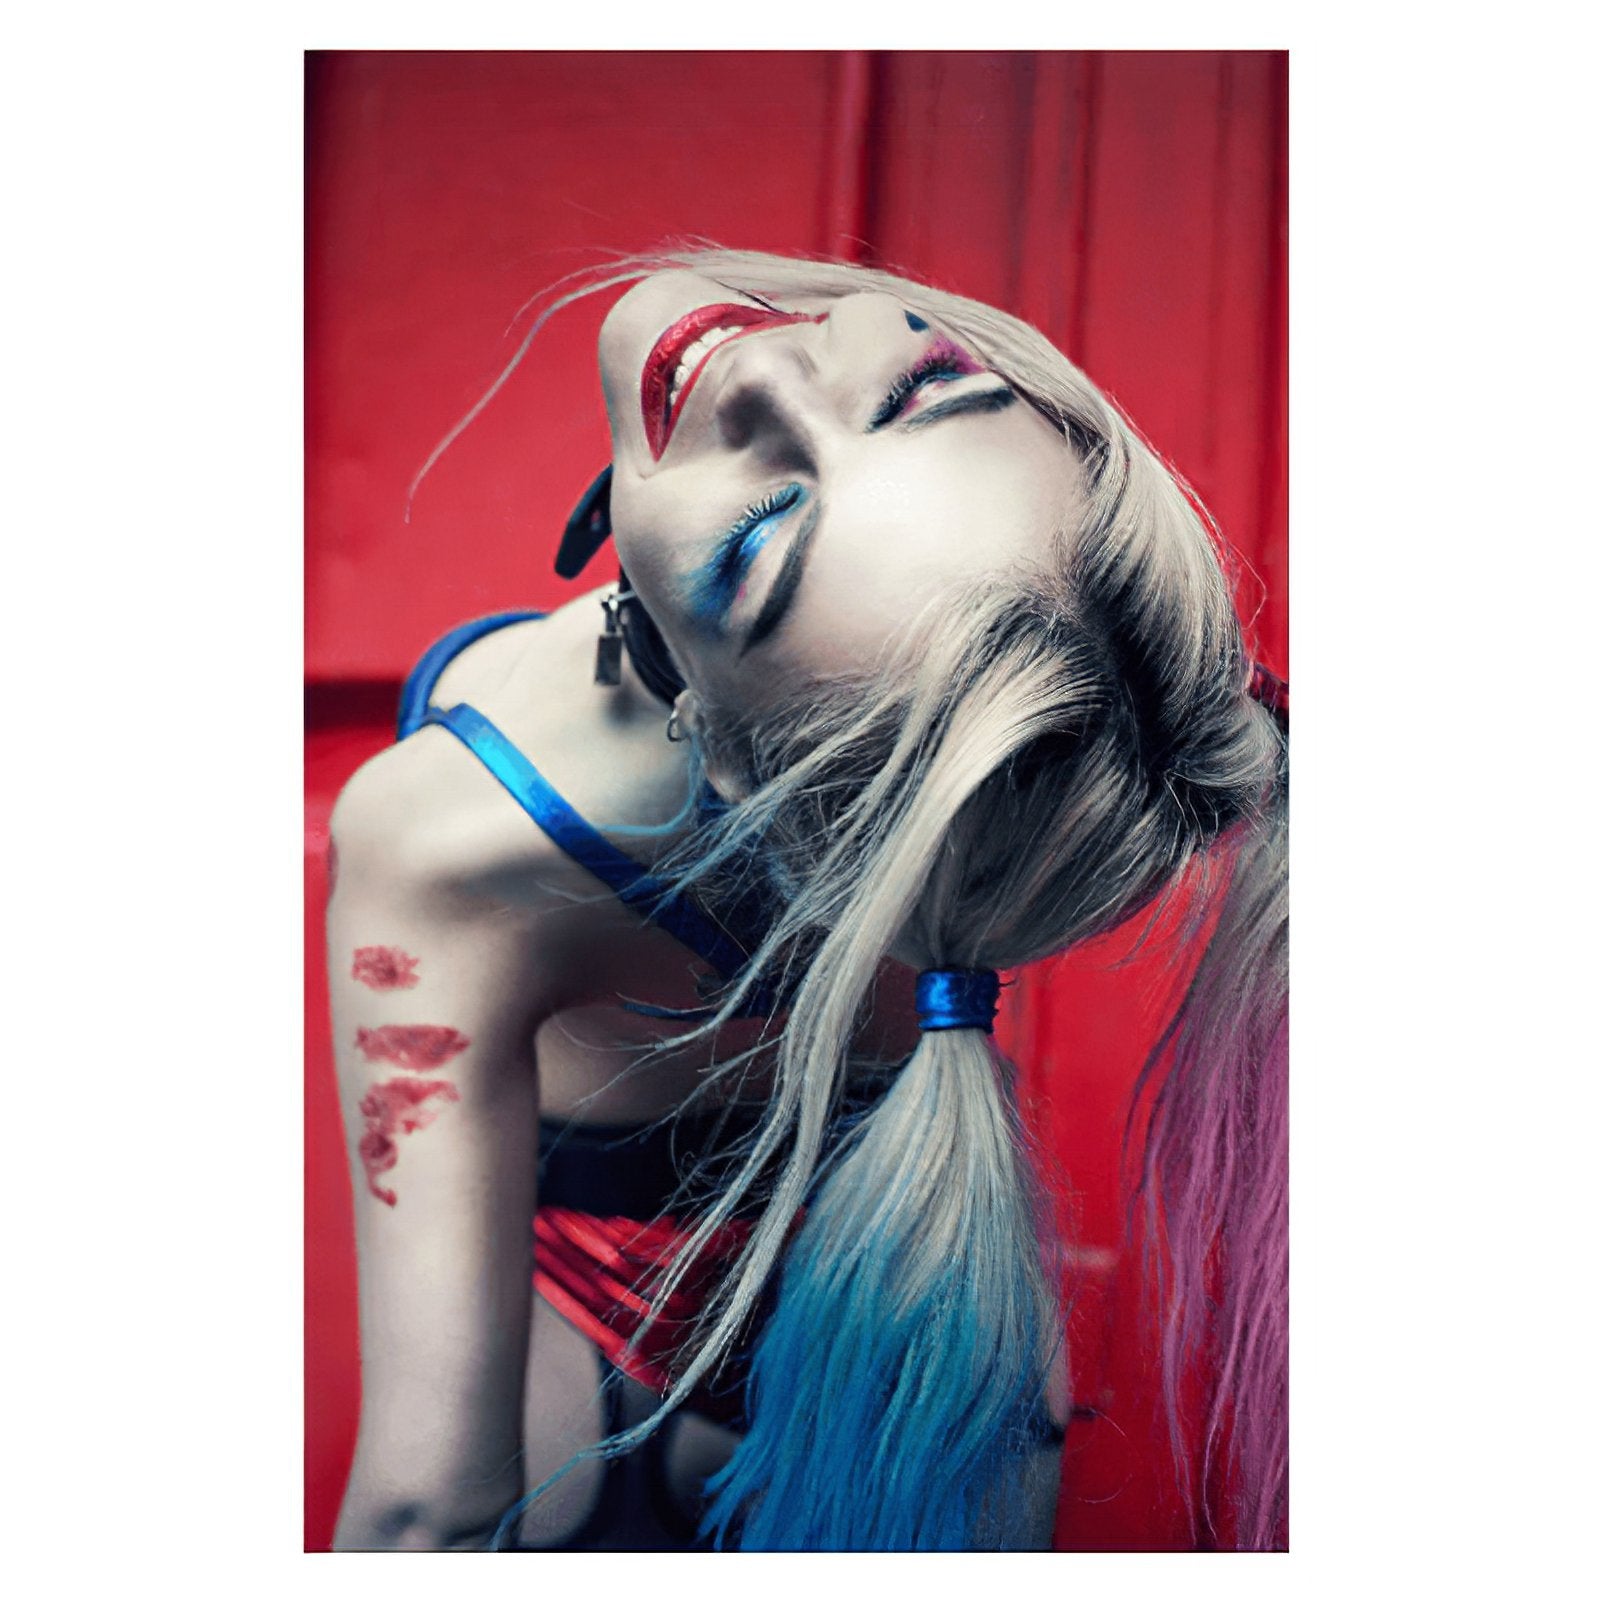 Harley Quinn Suicide Squad